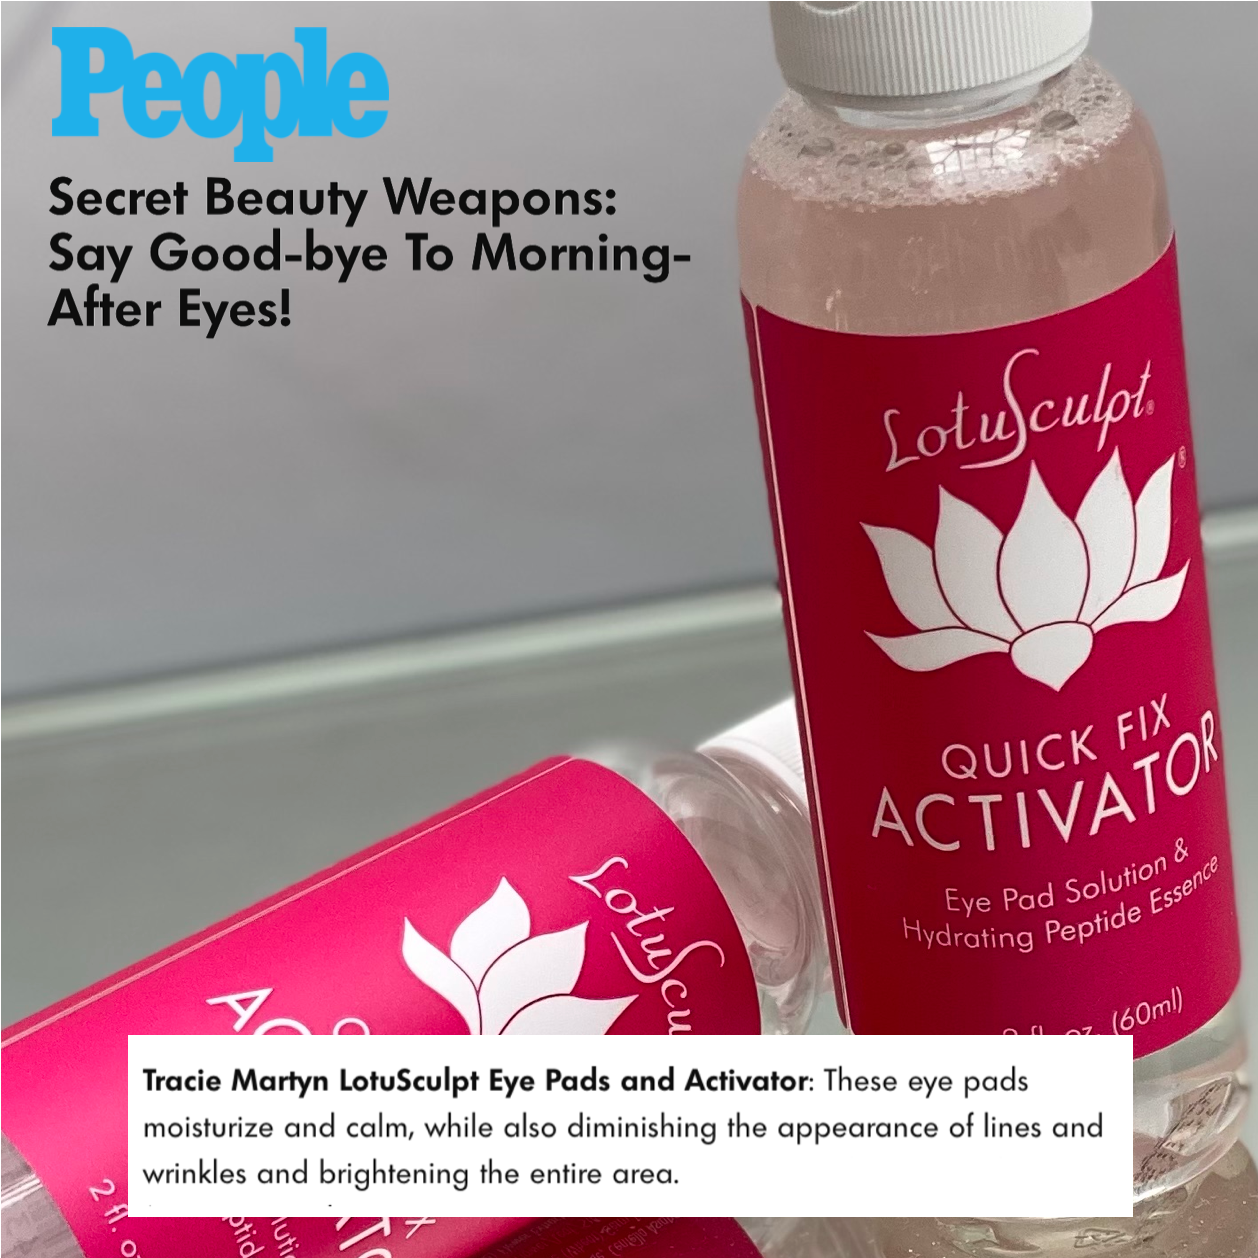 Secret Beauty Weapons: Say Good-bye to Morning-After Eyes! | People